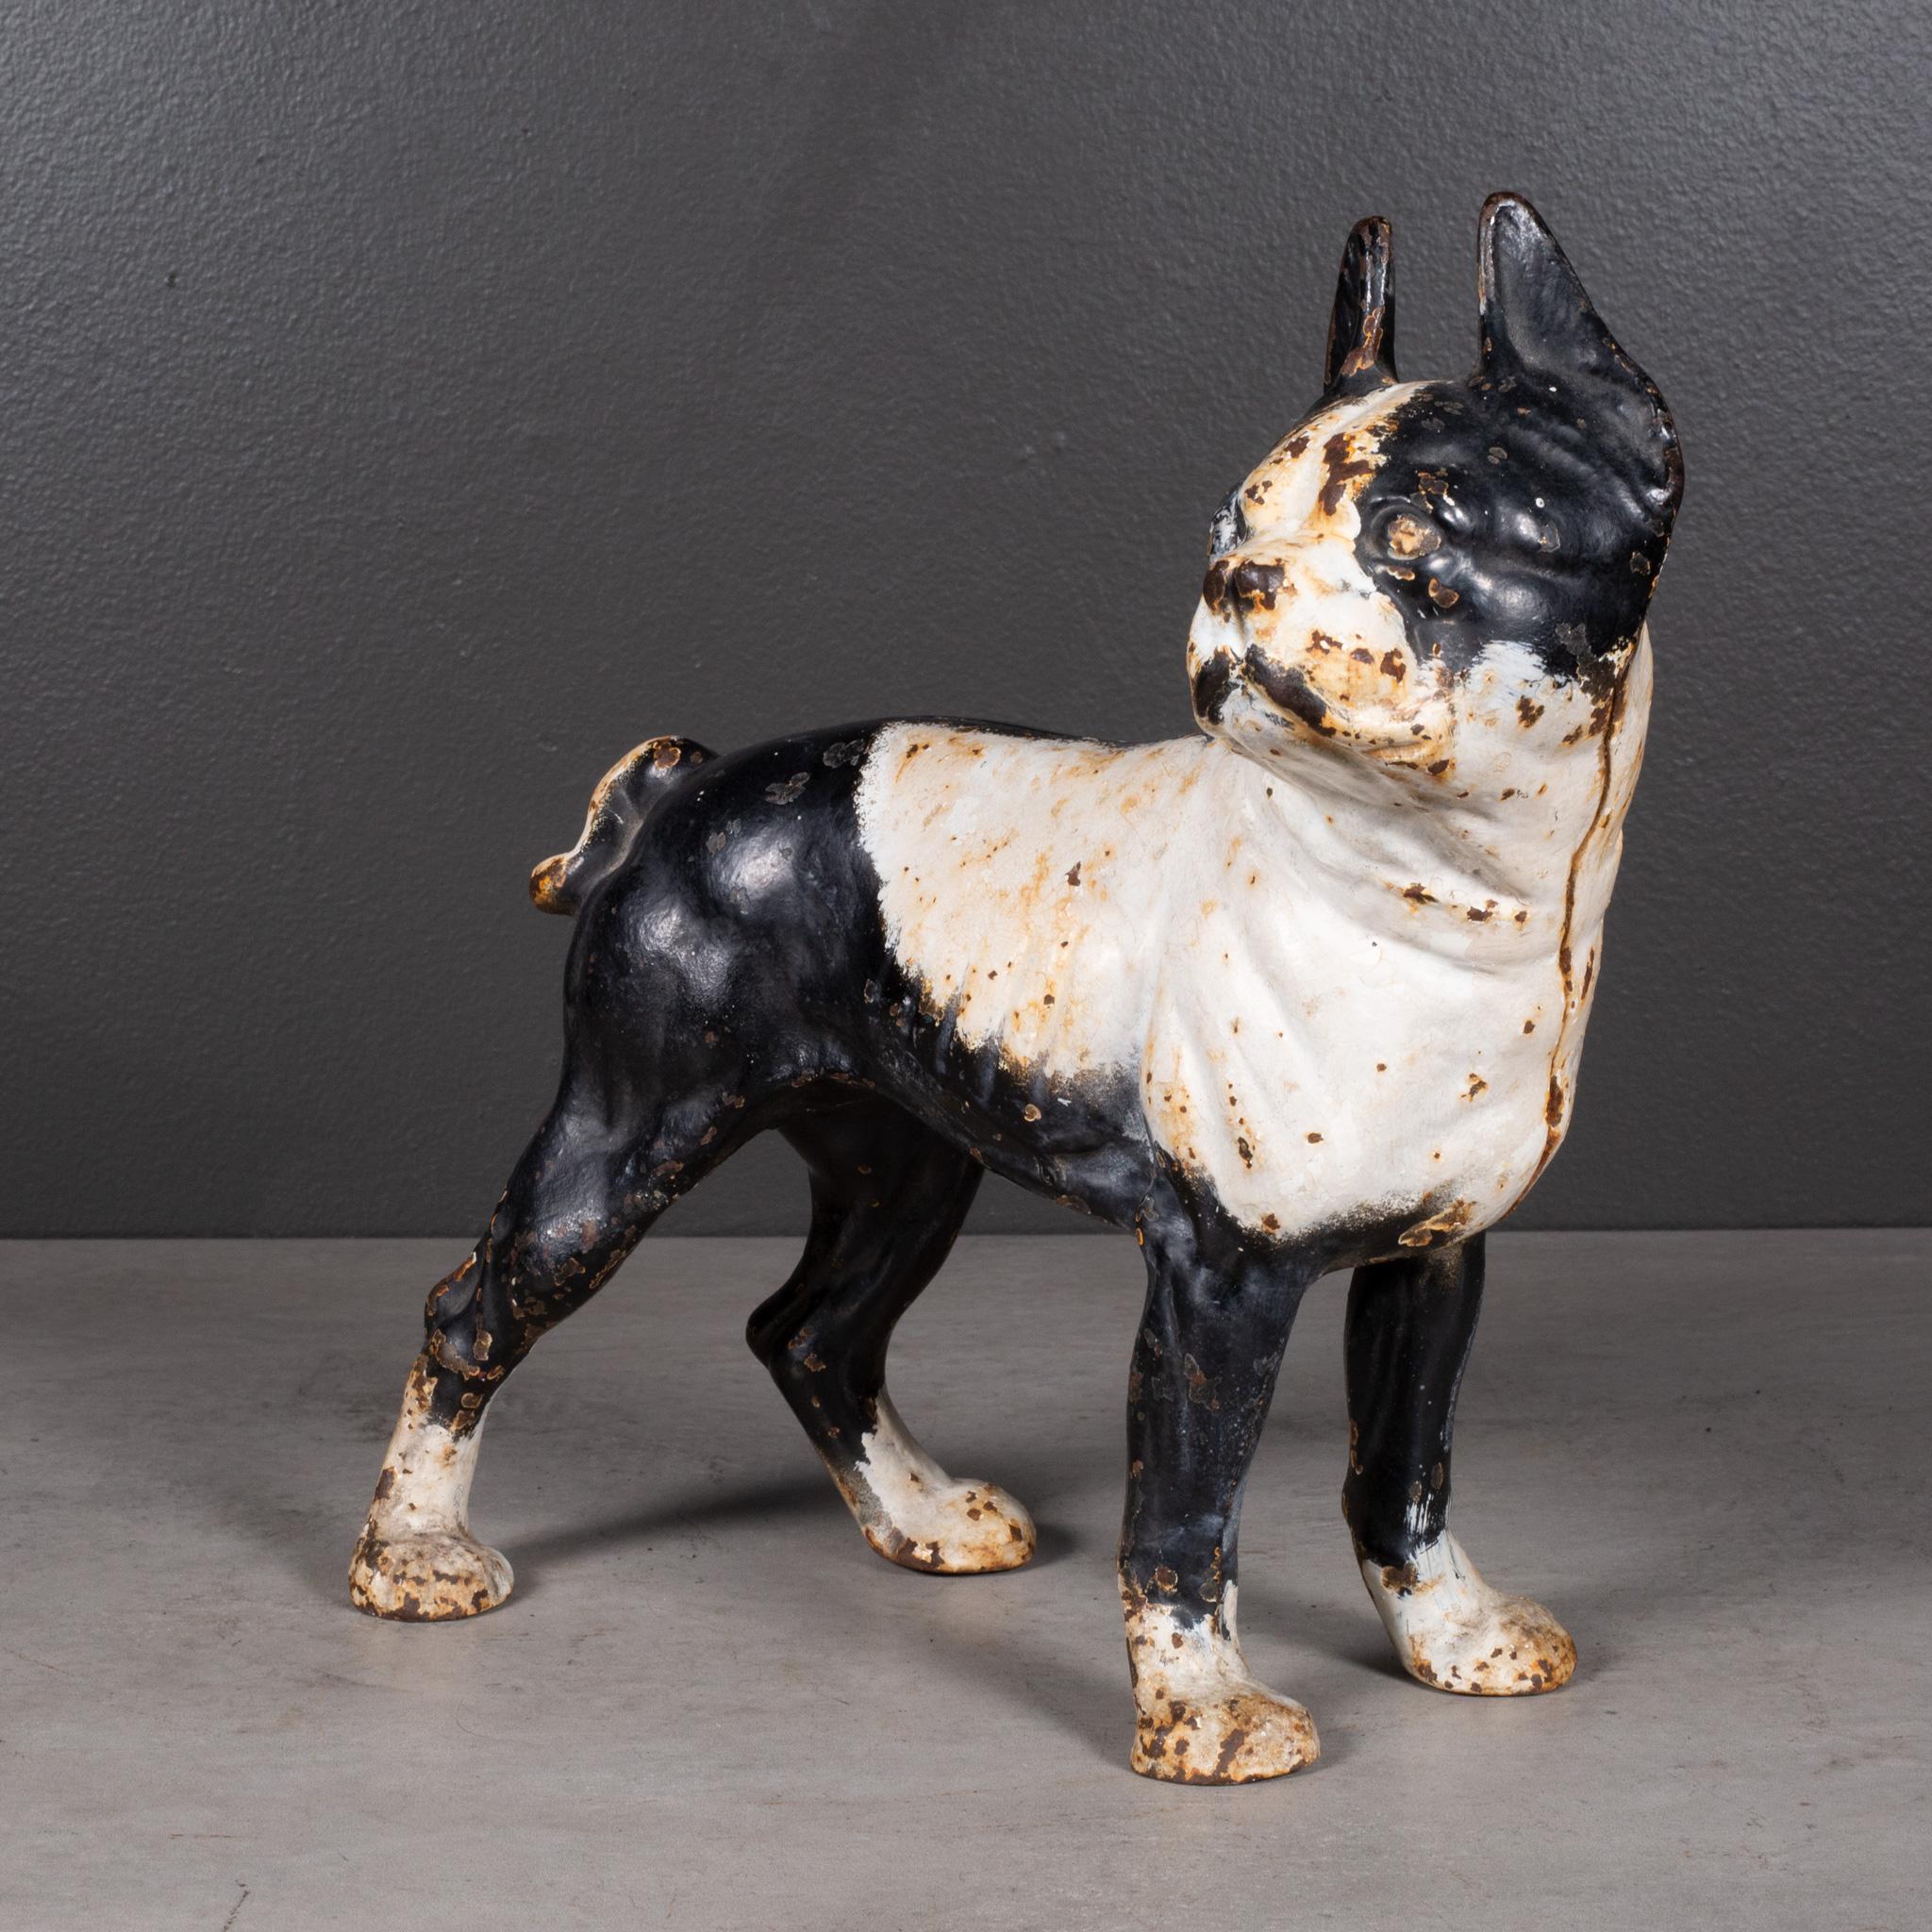 ABOUT

This is an original cast iron Boston Terrier doorstop manufactured by the Hubley Manufacturing Company in Lancaster Pennsylvania USA. The piece has retained its original hand painted finish and is in good condition with the appropriate patina